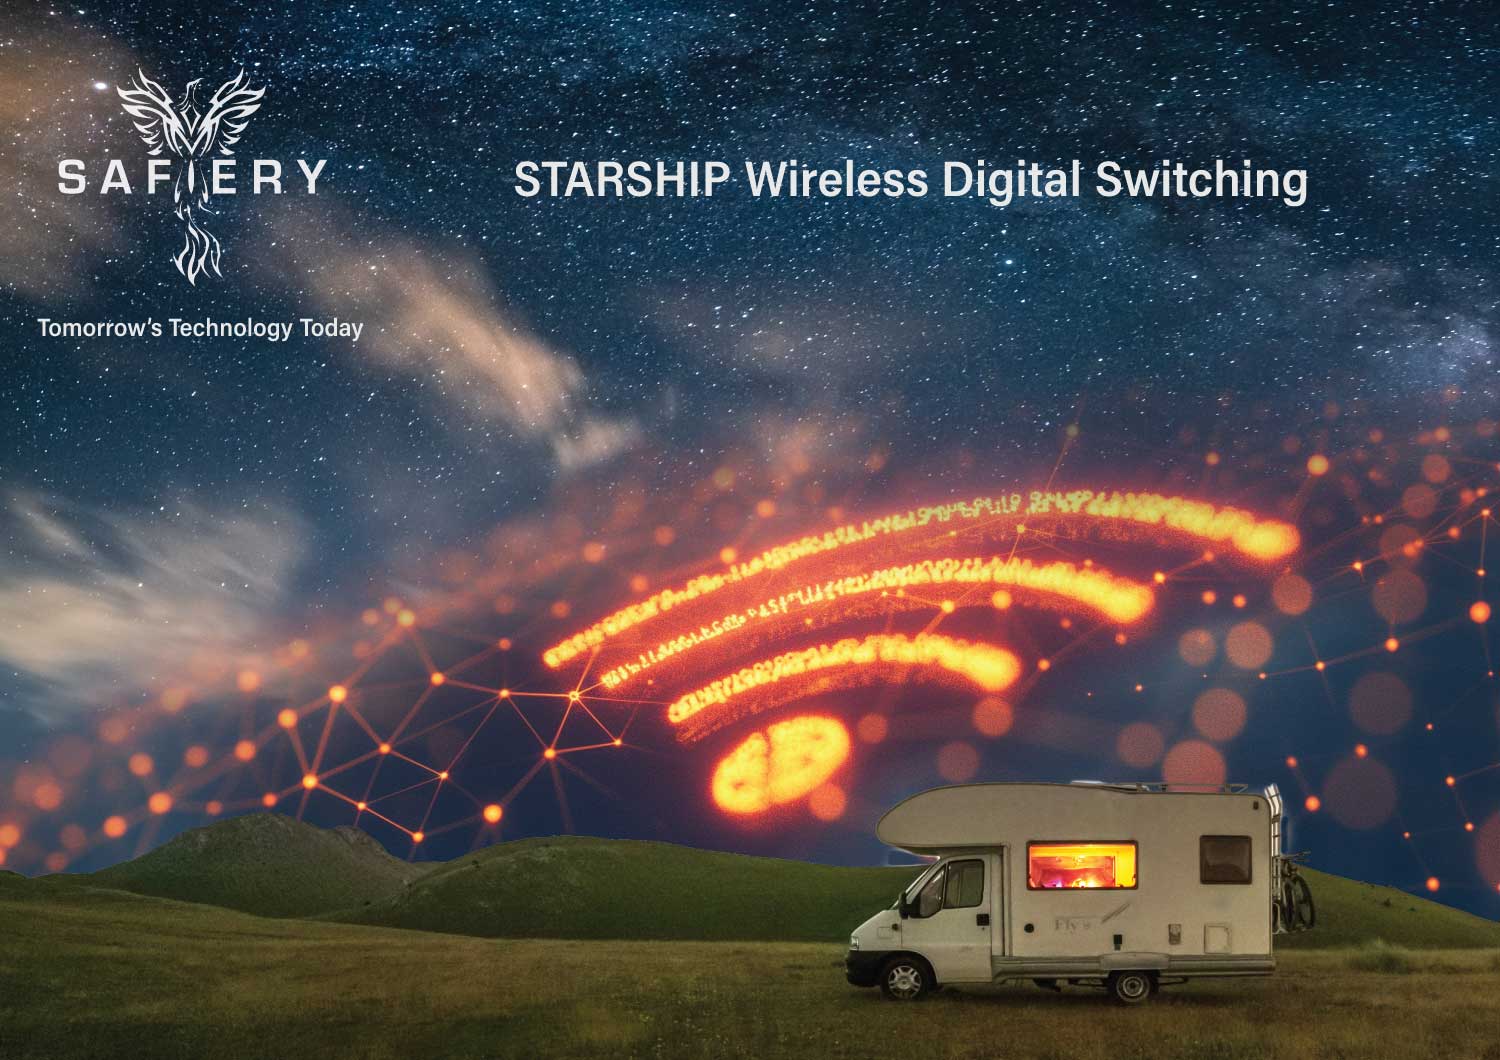 Starship Digital switching that is all wireless secure with smart switches and multiple displays